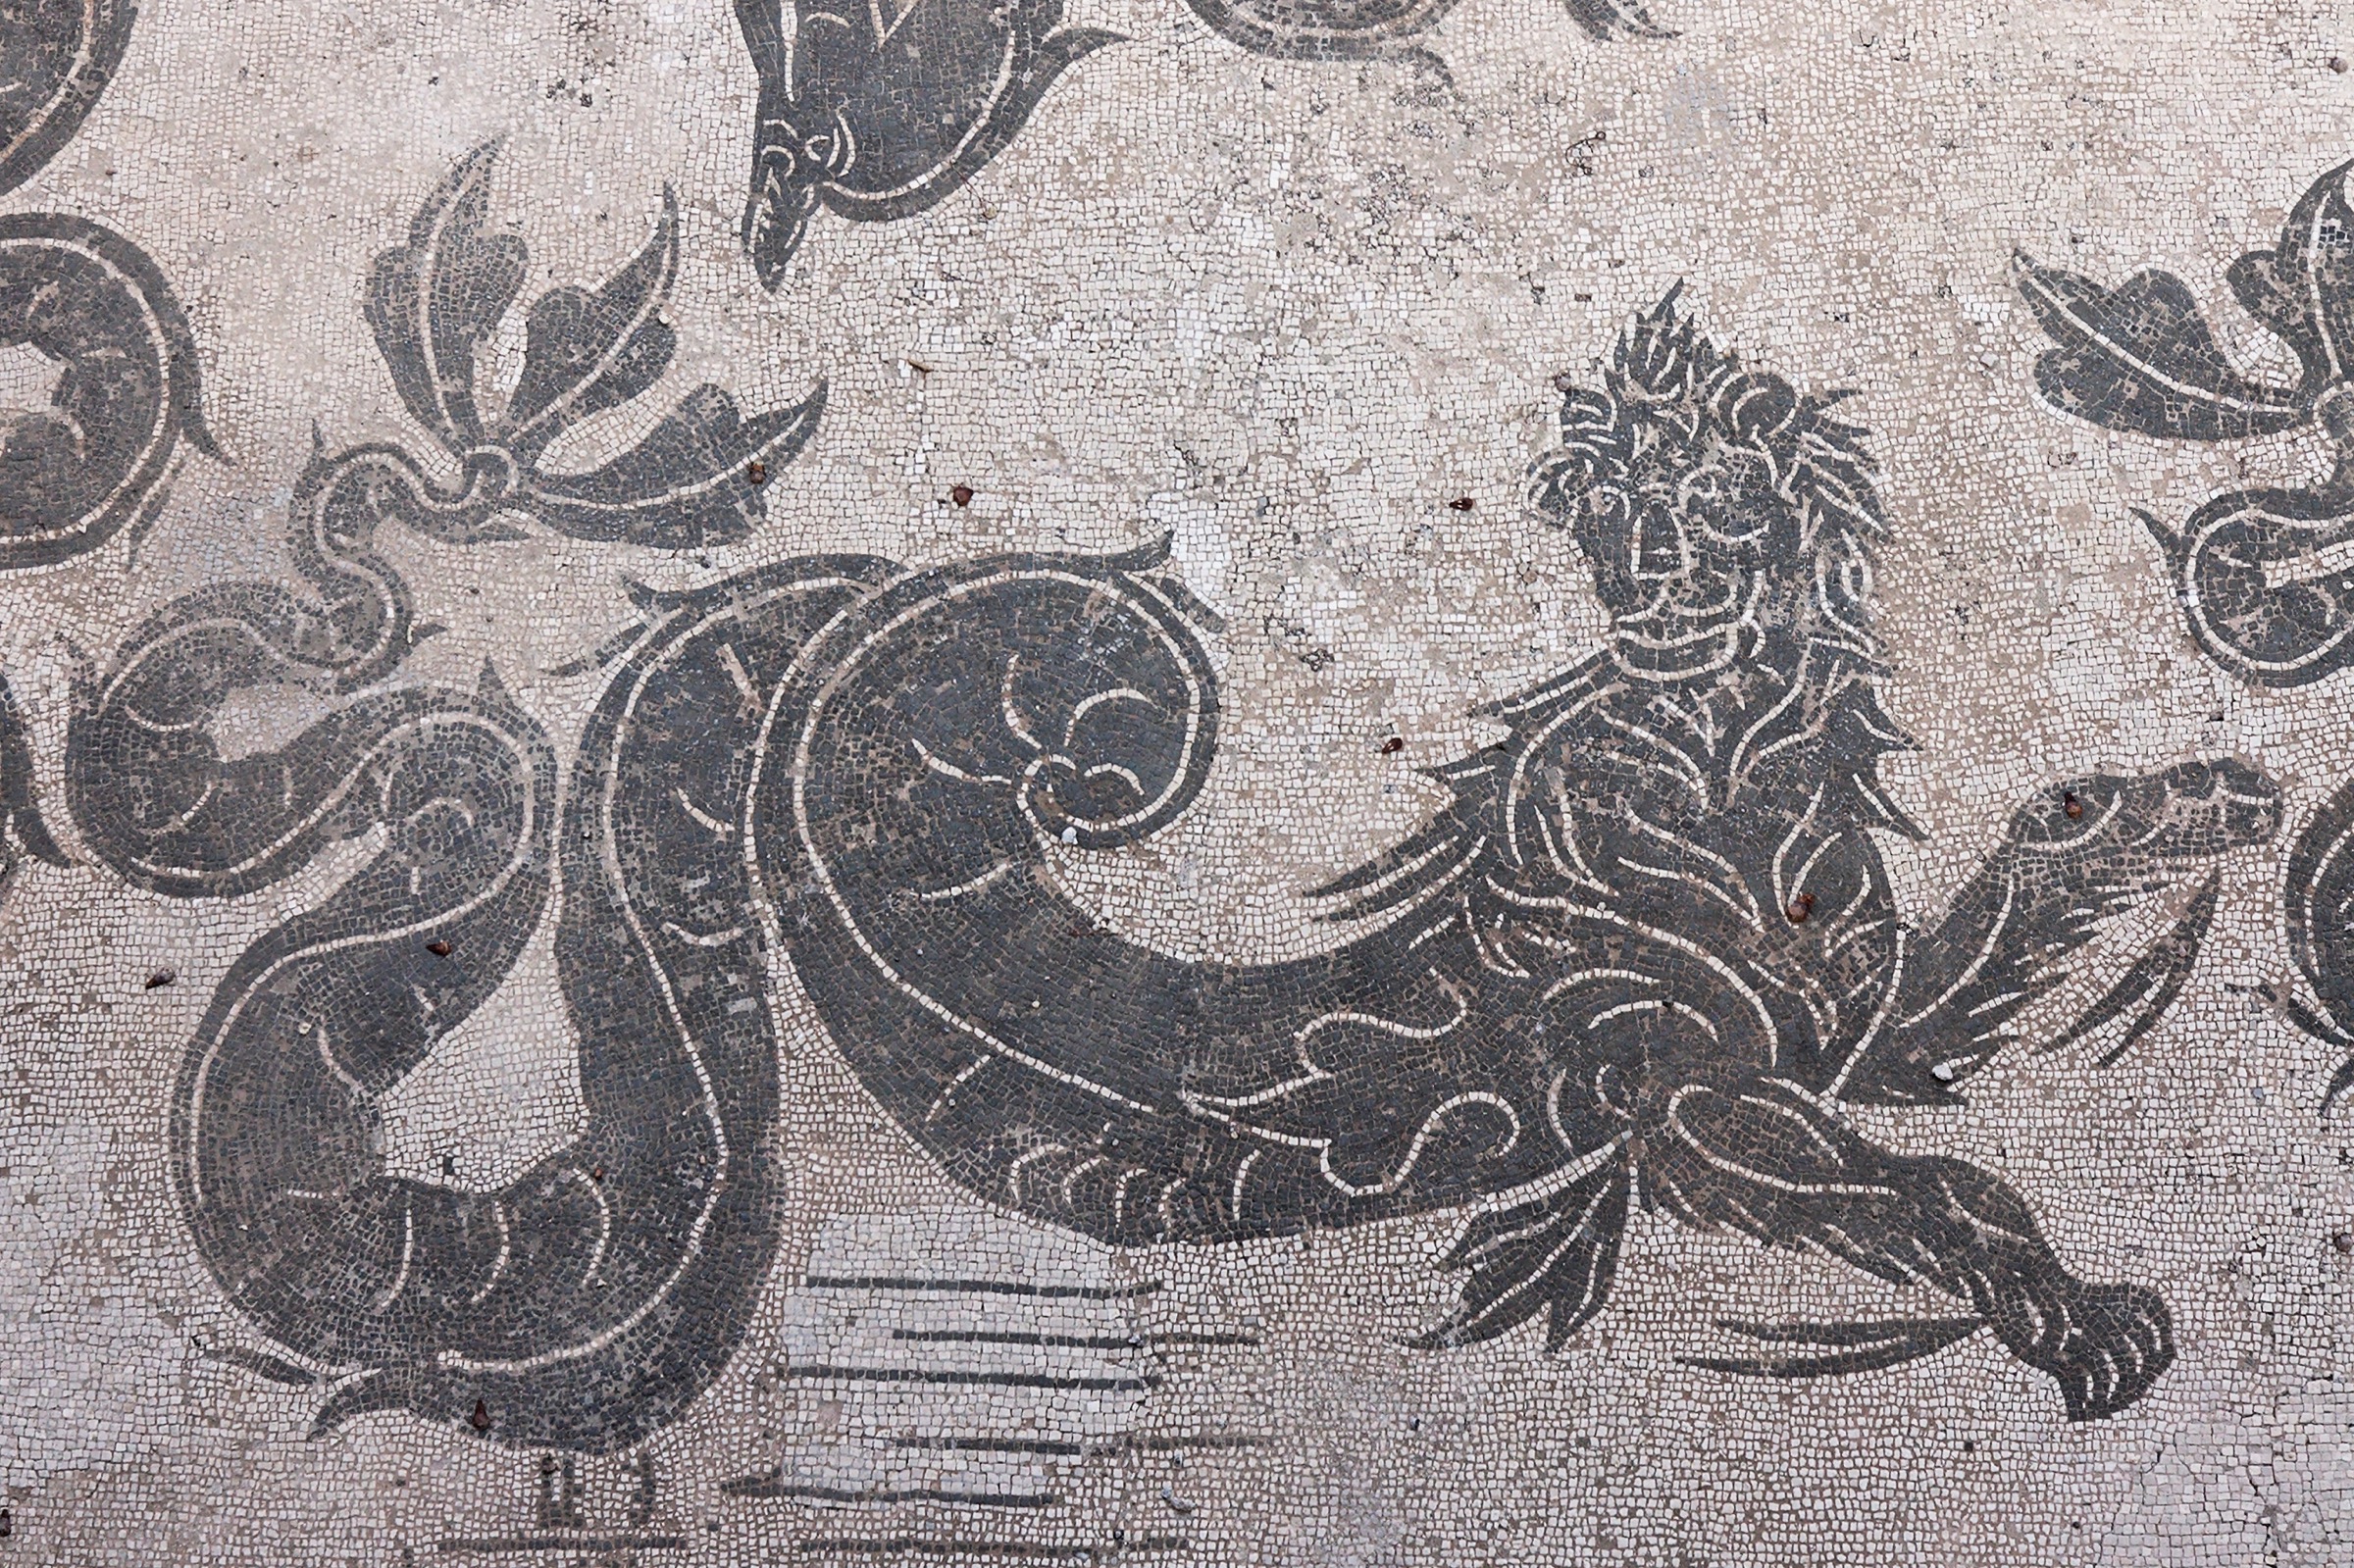 Image description: black and white mosaic of a creature with the head and paws of a lion and the lower body and tail of a snake, with three-lobed fish tail. It appears to have cartoonish ripple lines drawn with mosaic tile around its paws showing it is paddling, and lines beneath it showing forward motion.